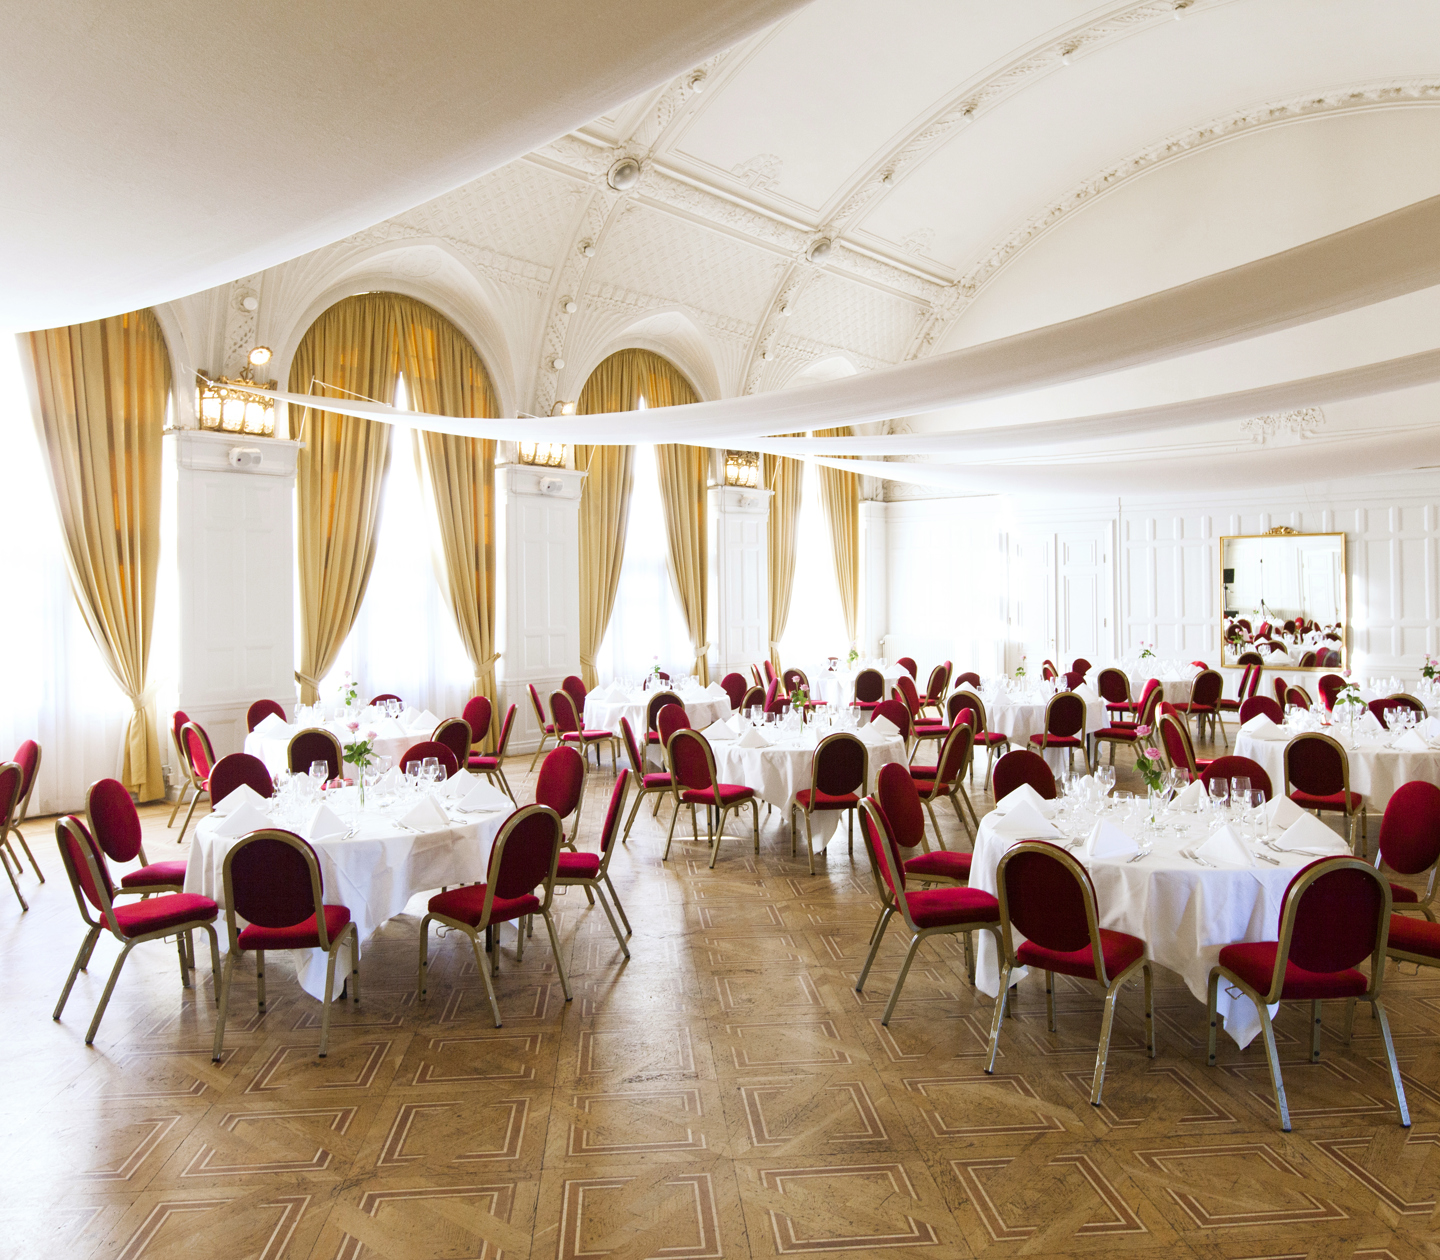 A large hall with high ceilings and round restaurant tables